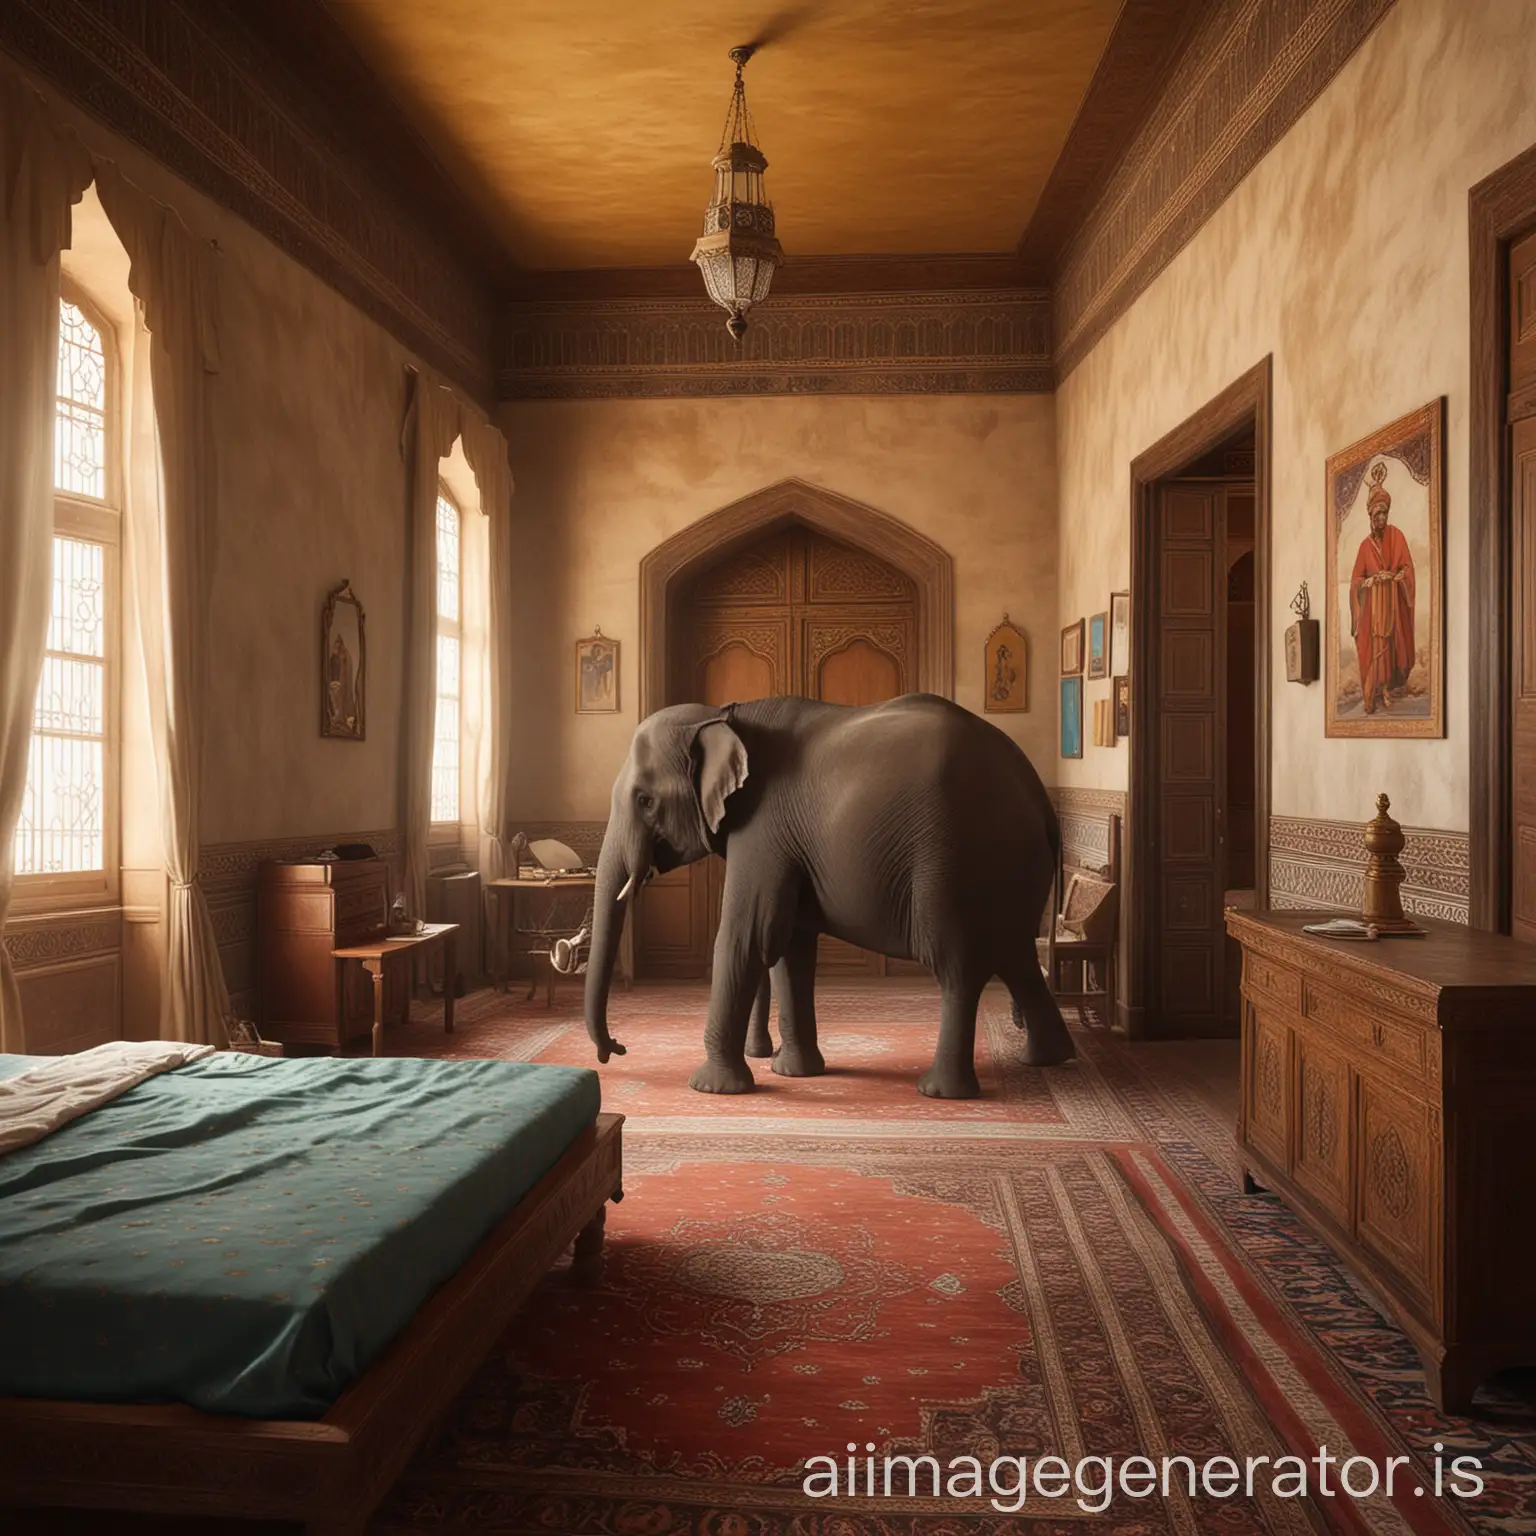 a first person game inside a bedroom in a sultan's palace with an elephant.